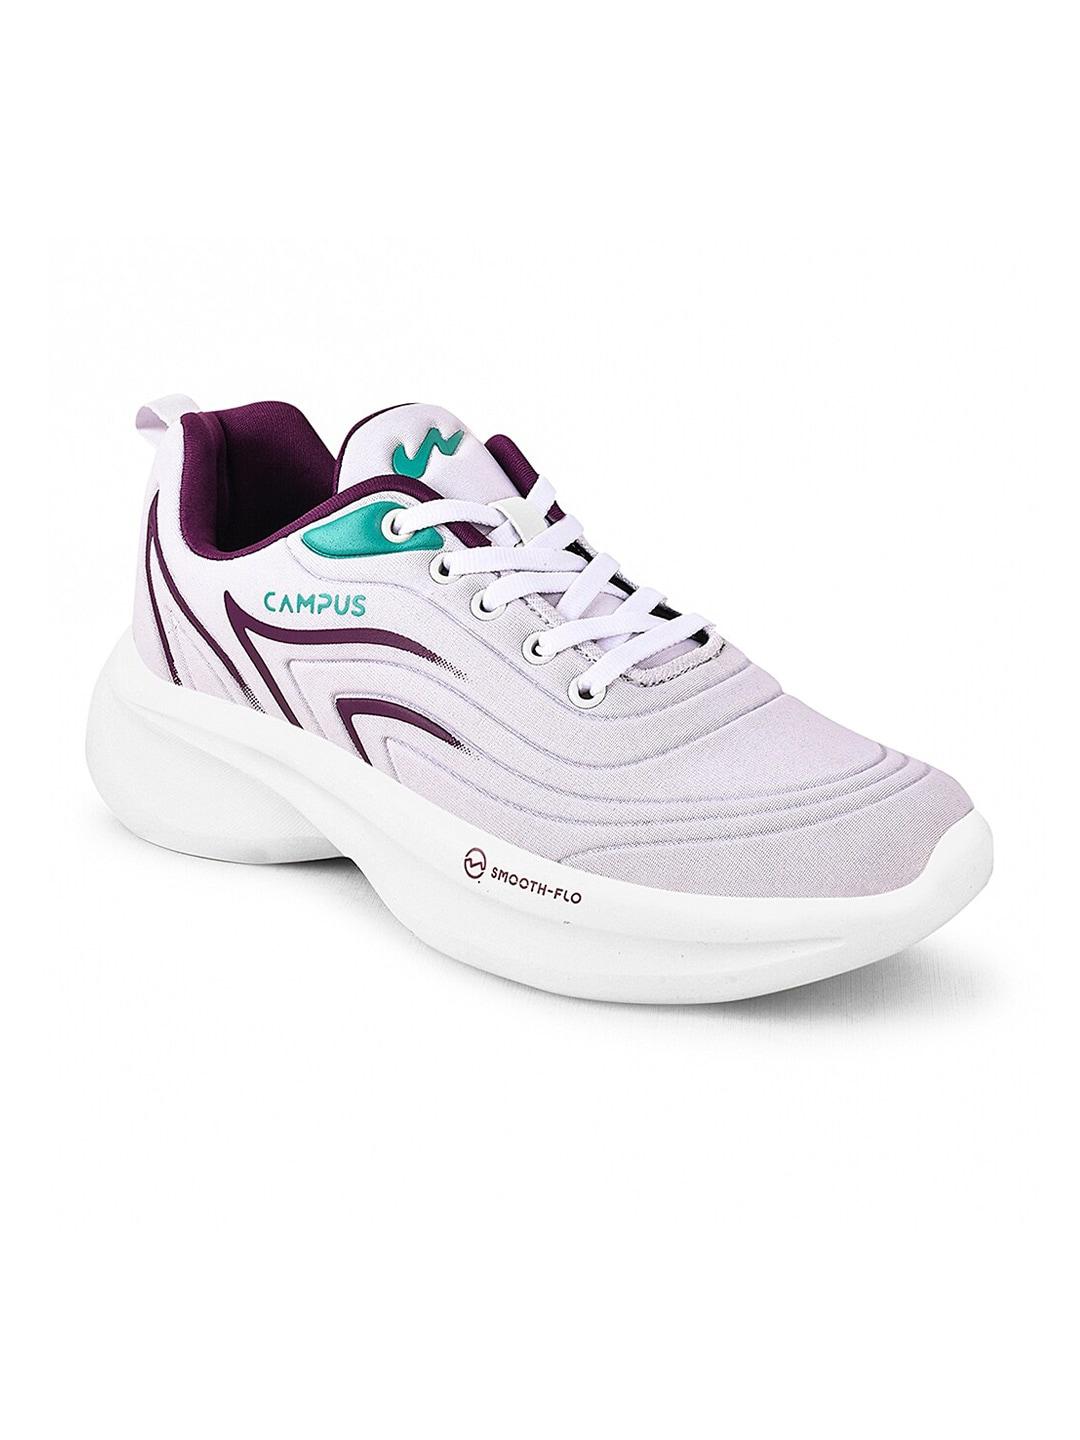 Campus Women CANDID Mesh Running Shoes